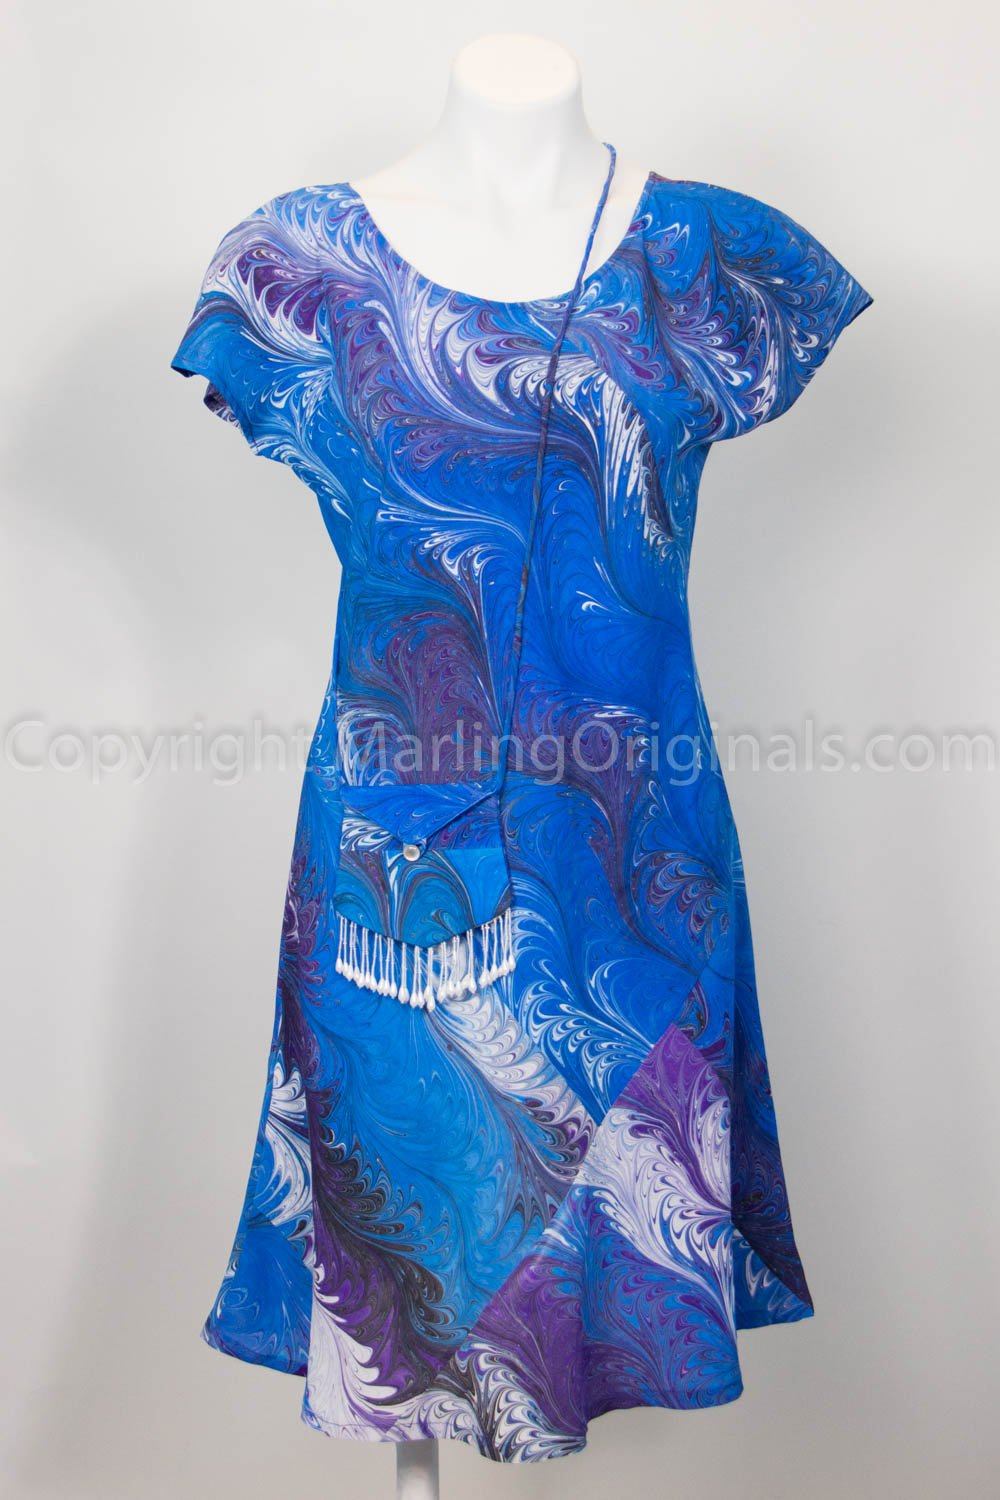 dress for smart casual in marbled blues and purples with bag